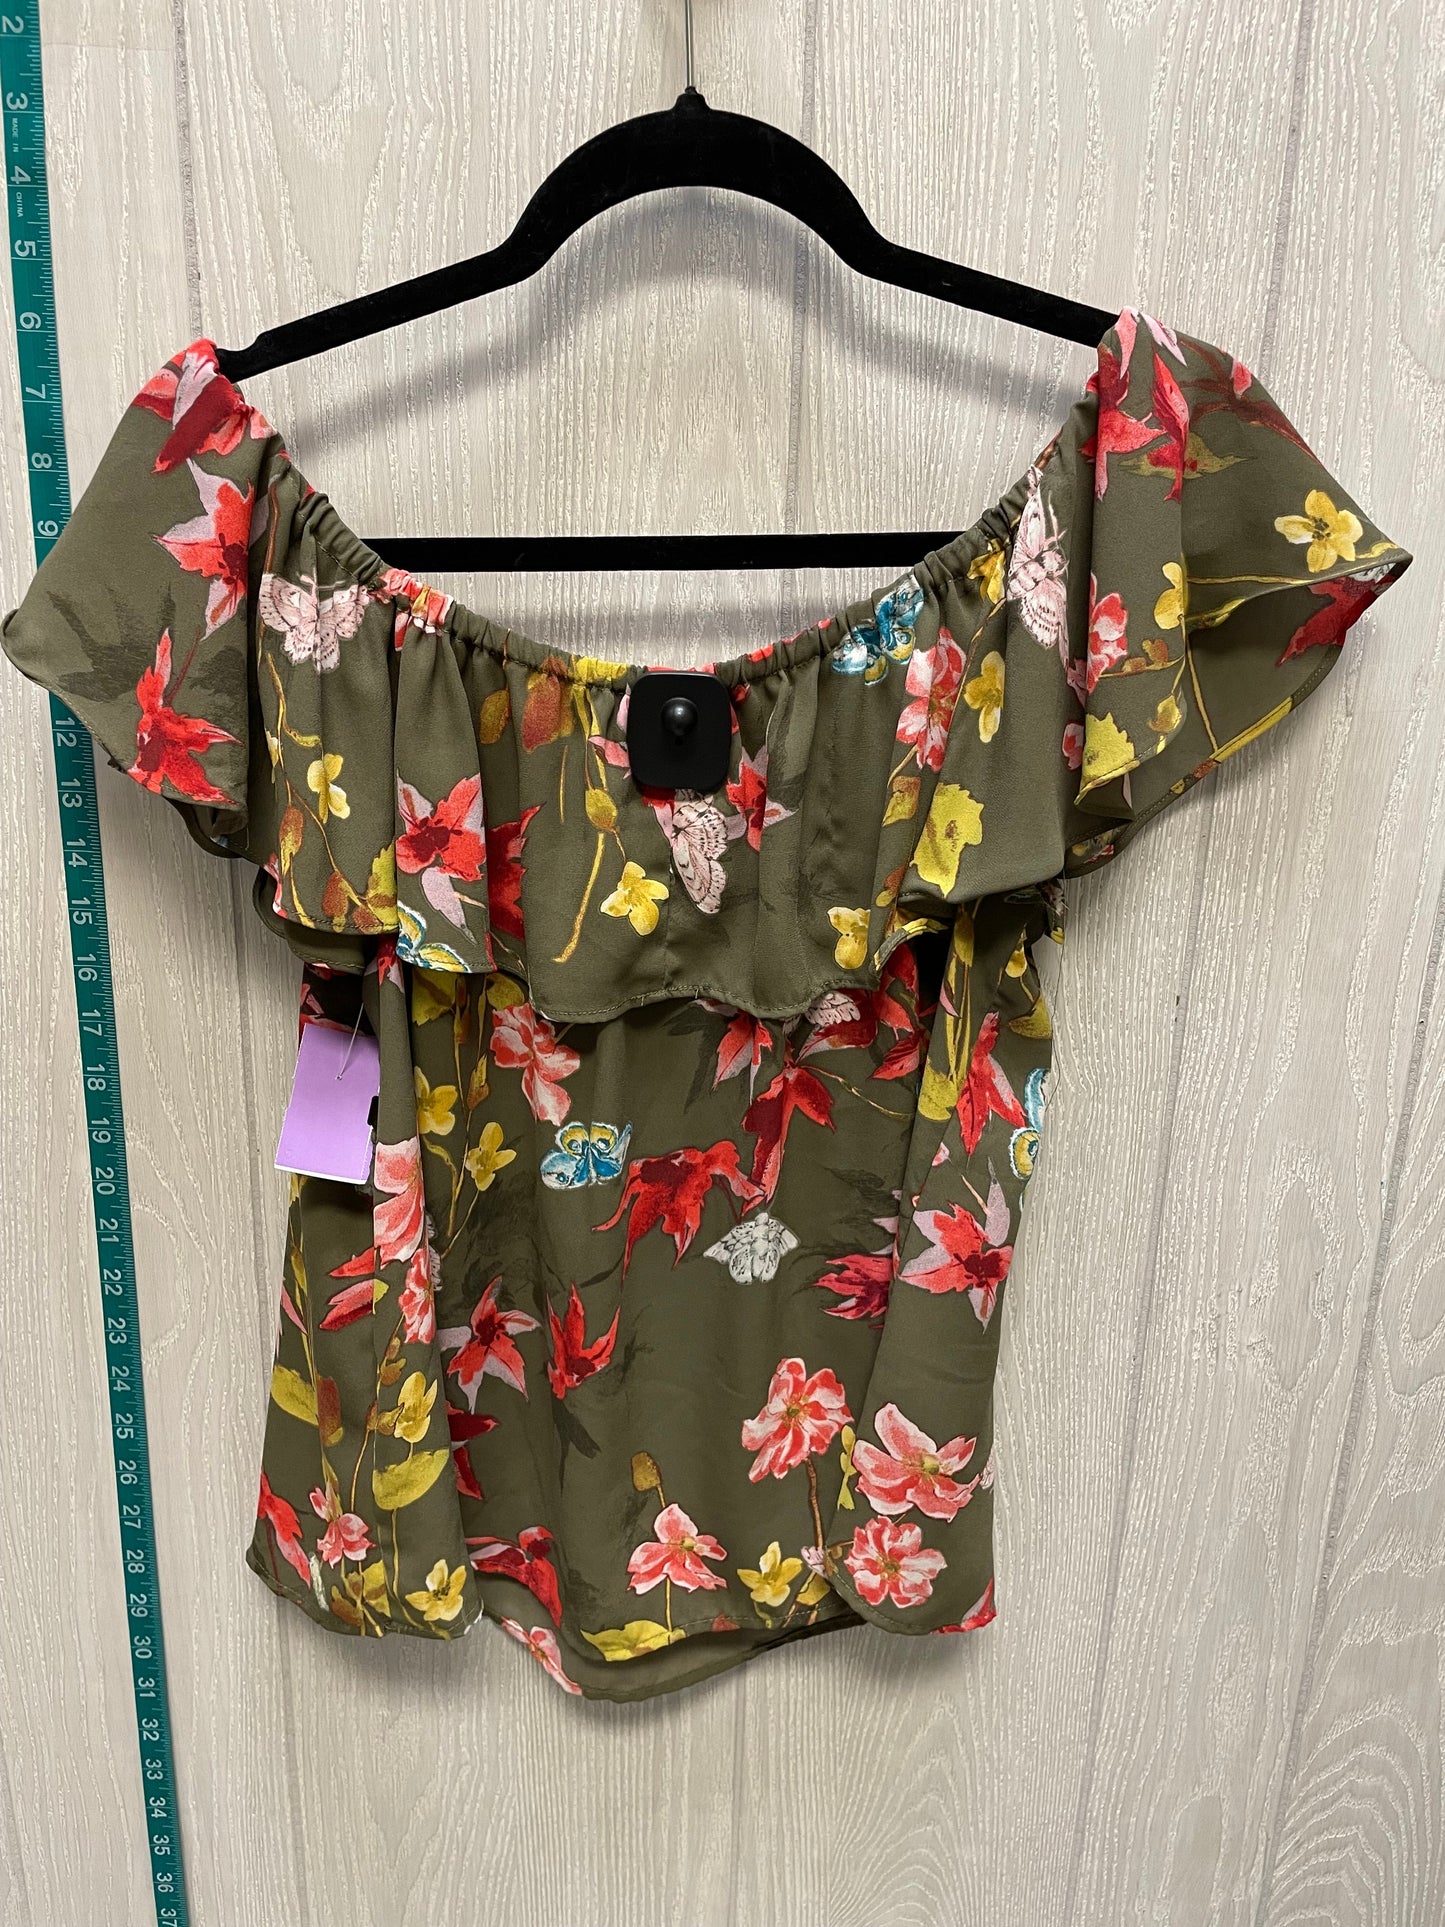 Floral Print Top Short Sleeve Maeve, Size S